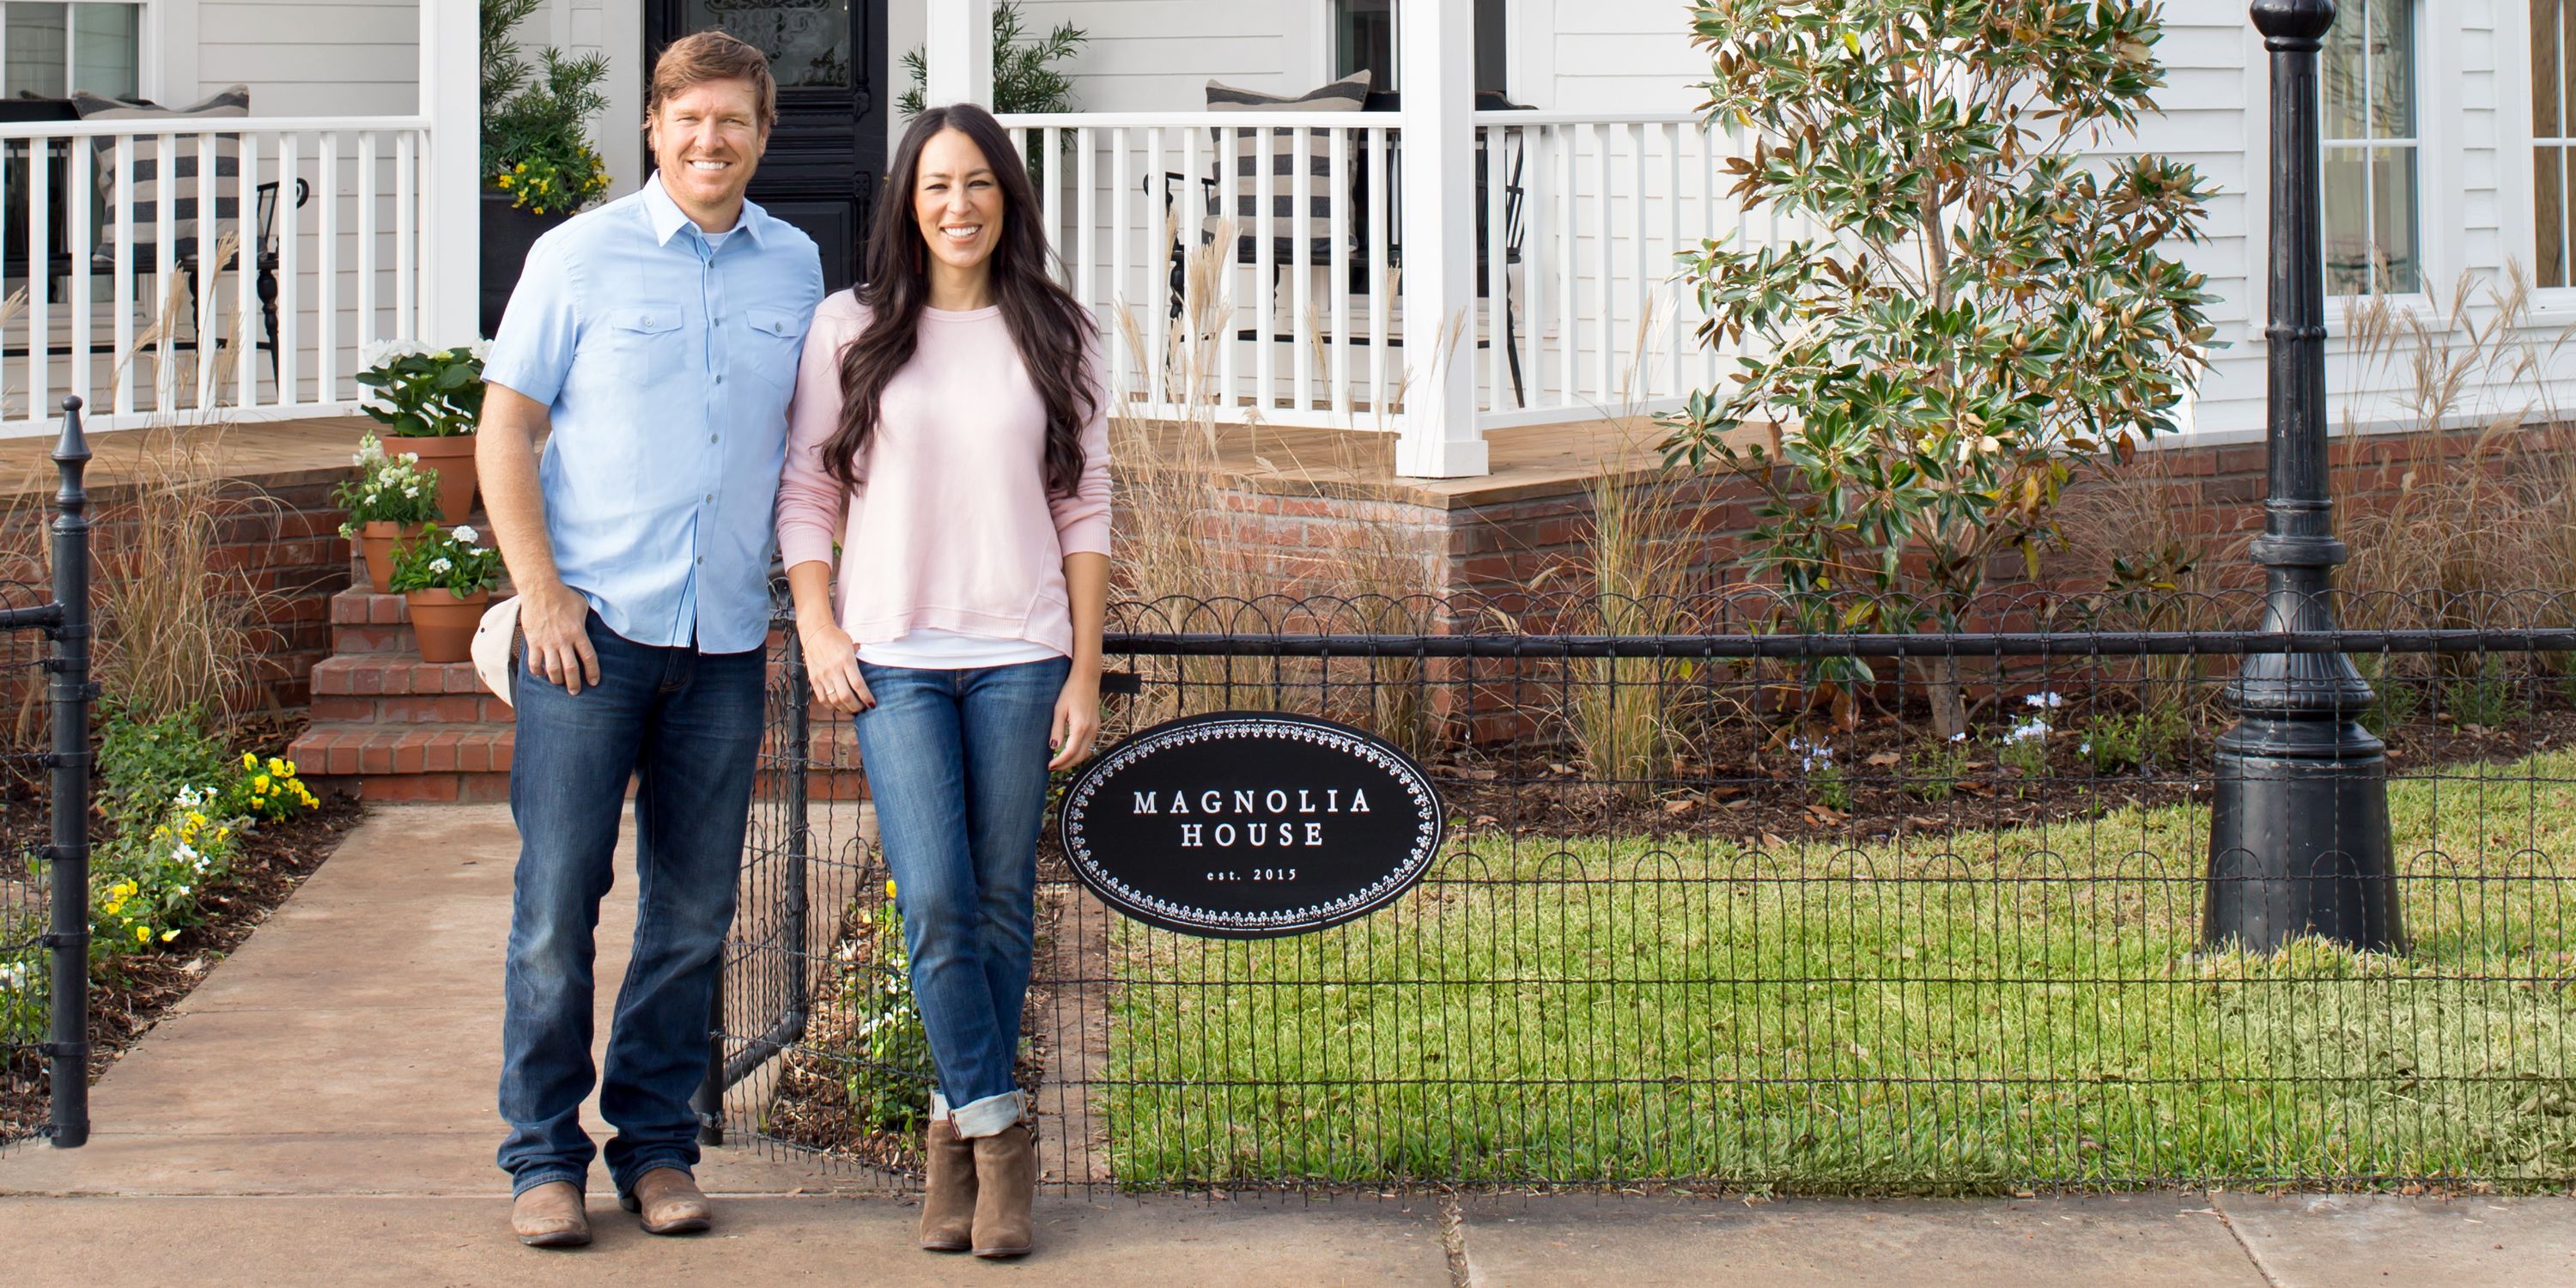 Chip And Joanna Gaines Magnolia House B B Tour Fixer Upper Decorating Inspiration